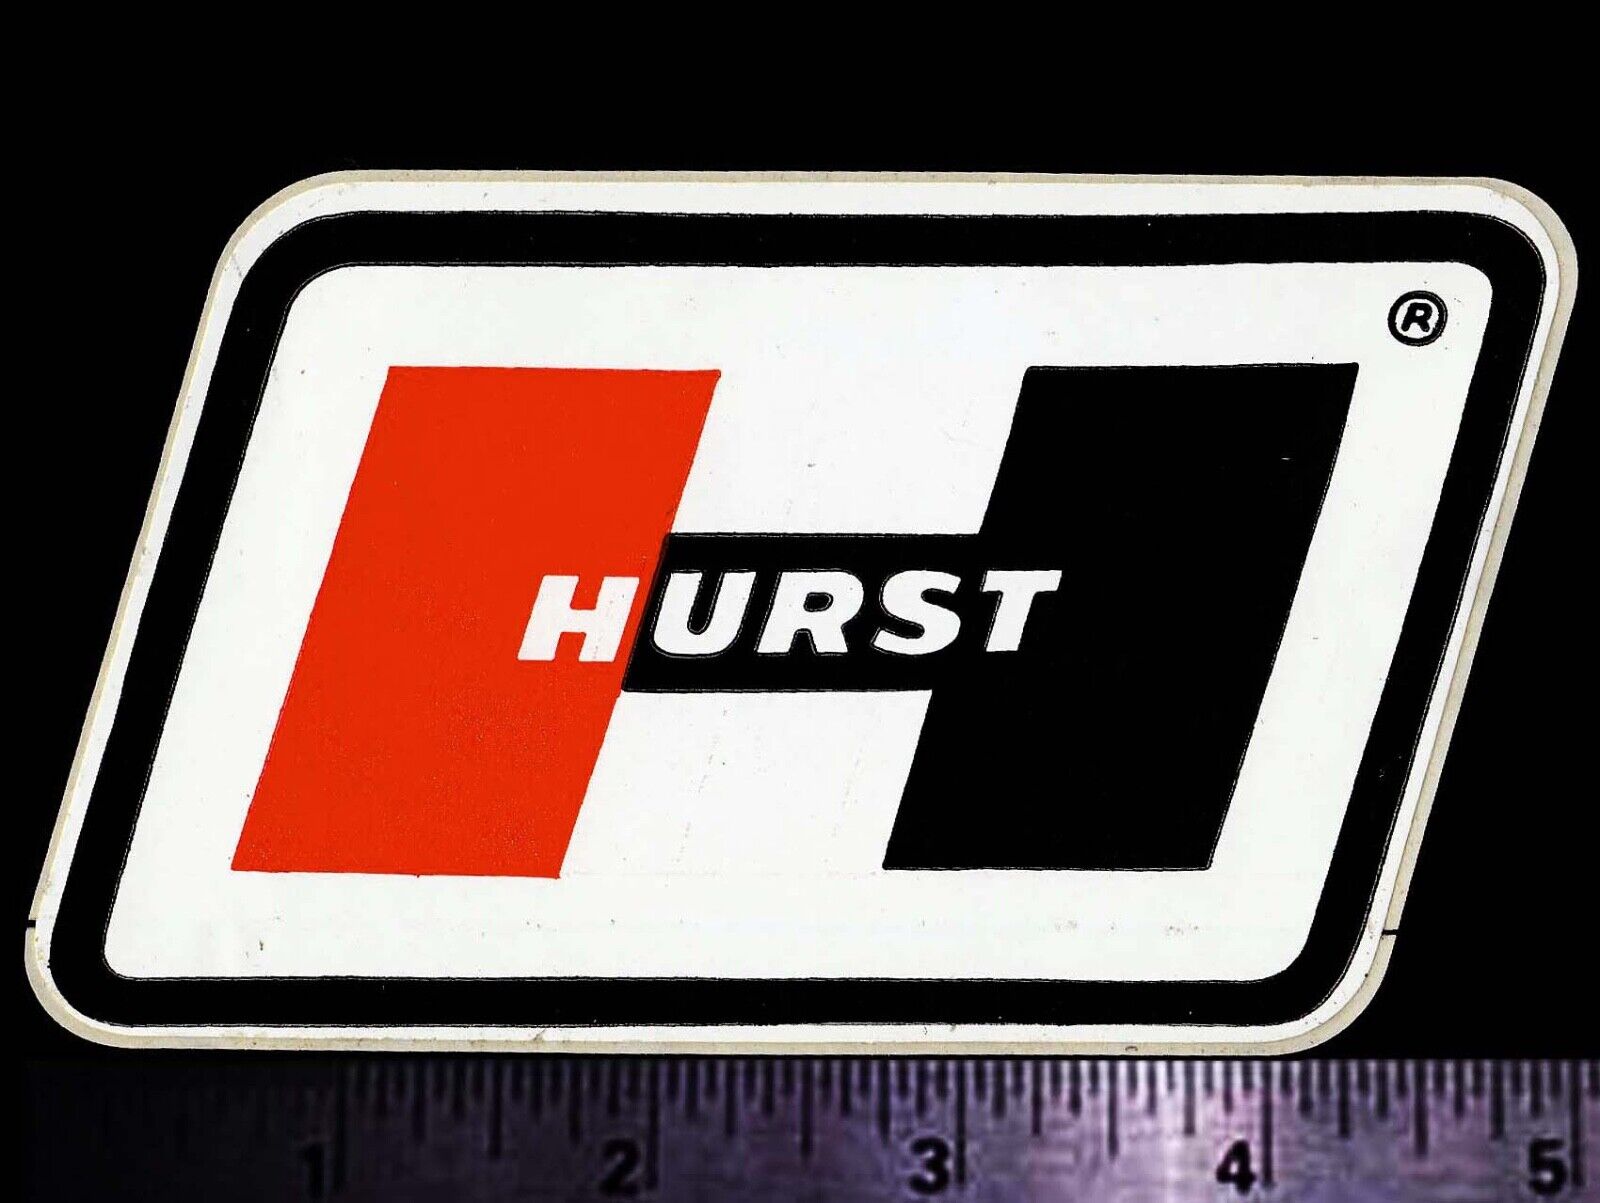 HURST Shifters - Original Vintage 1960's 70's Racing Decal/Sticker - 5 inch size